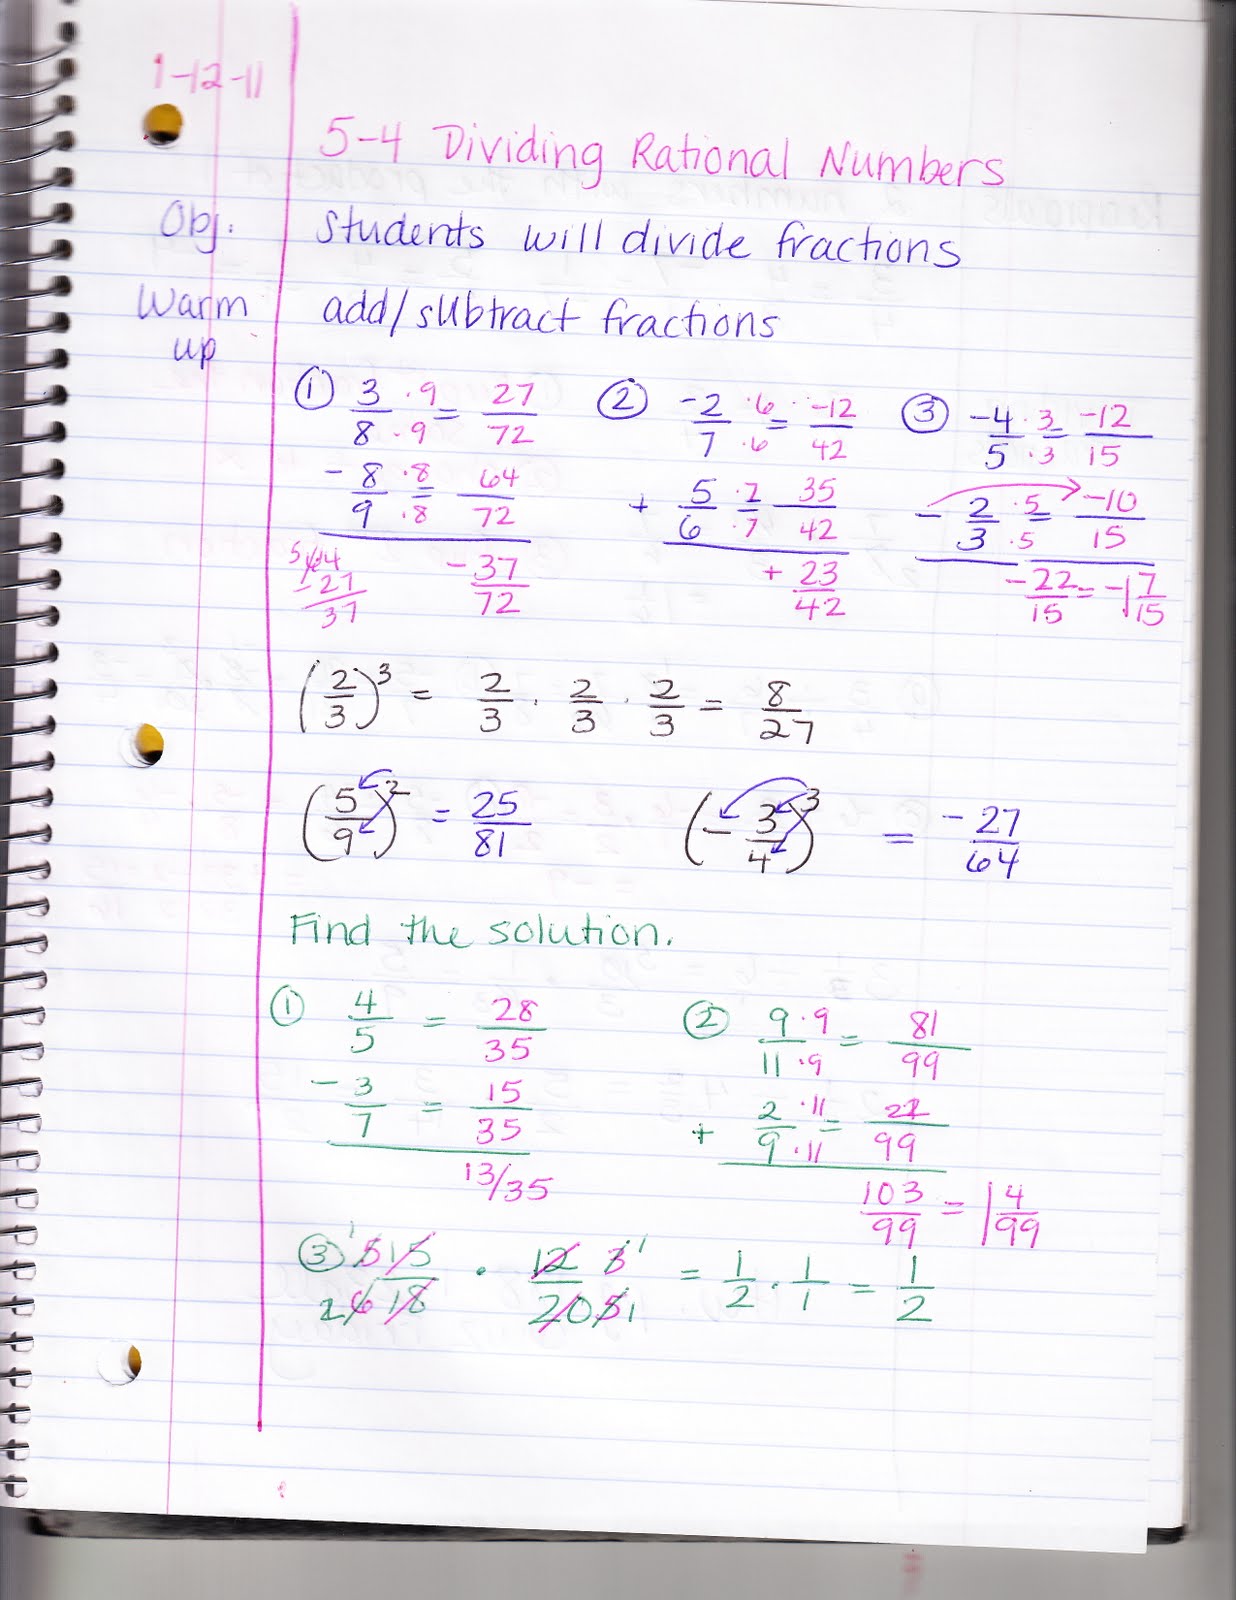 Ms. Jean's Algebra Readiness Blog: 5-4 Dividing Rational Numbers